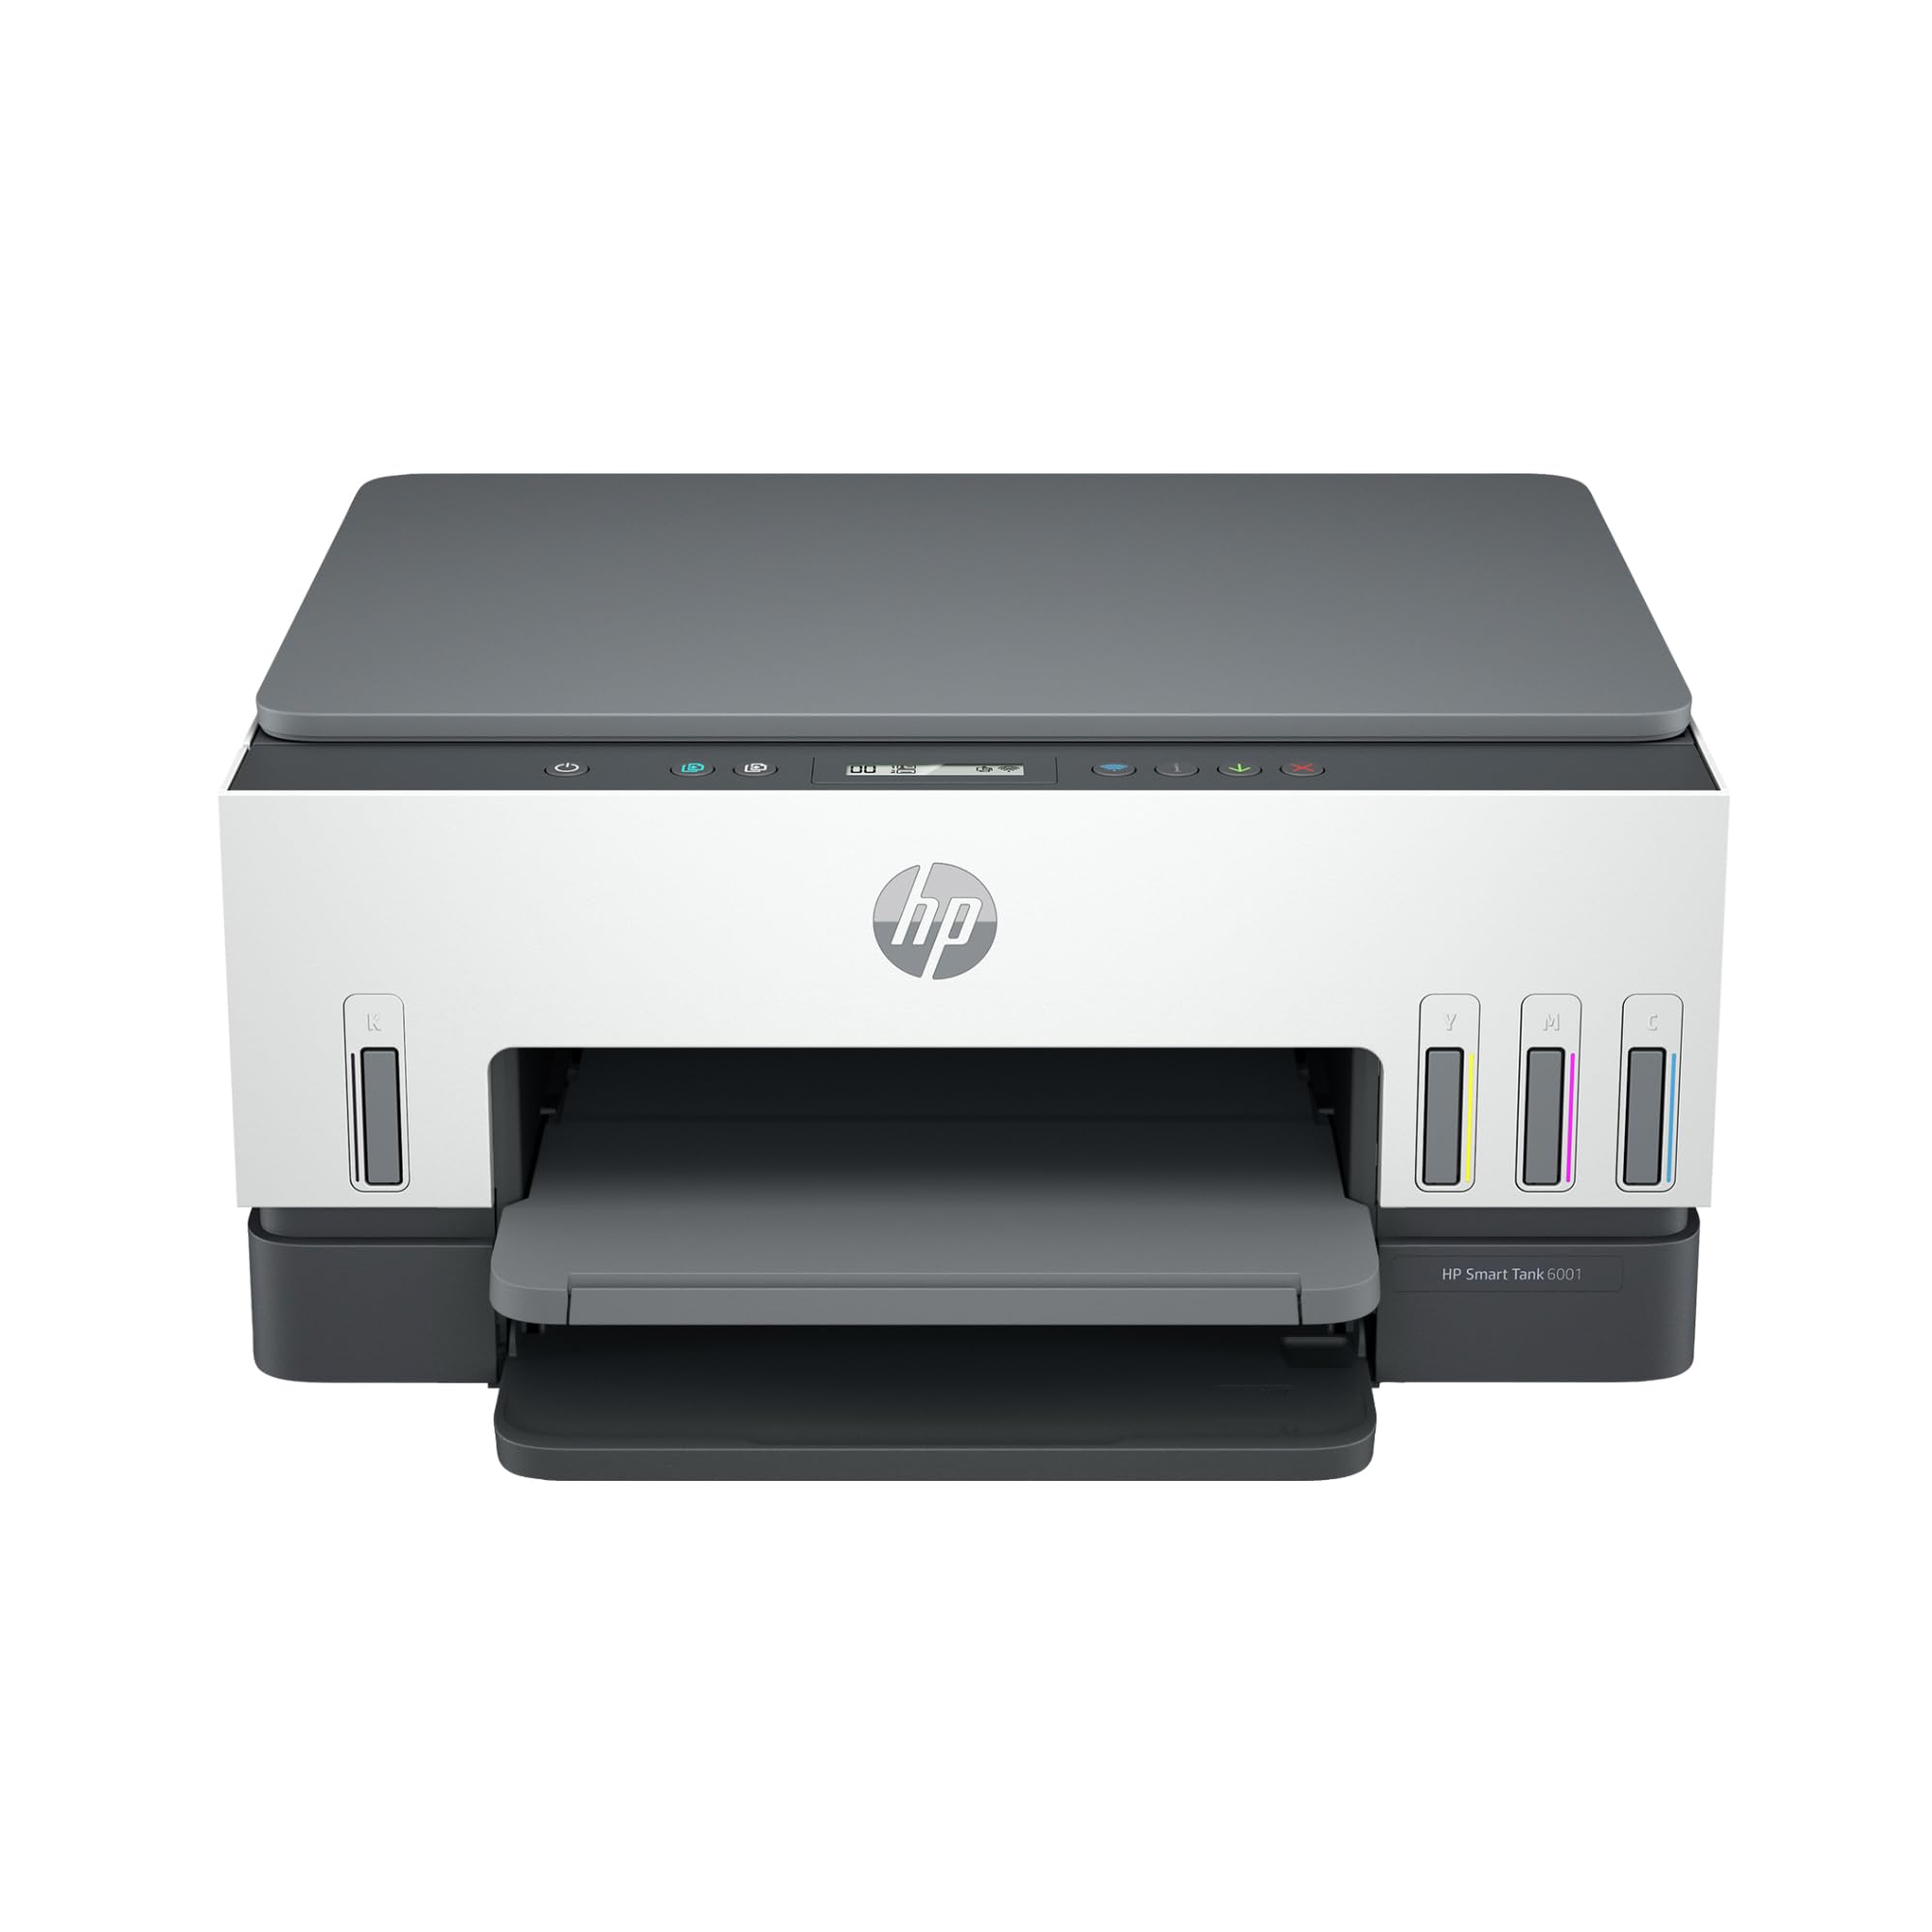 Check ink or toner levels – Verify that the printer has enough ink or toner to complete the print job.
Run Apple's Printer Utility – Launch the Printer Utility application and use it to troubleshoot and diagnose printer issues.